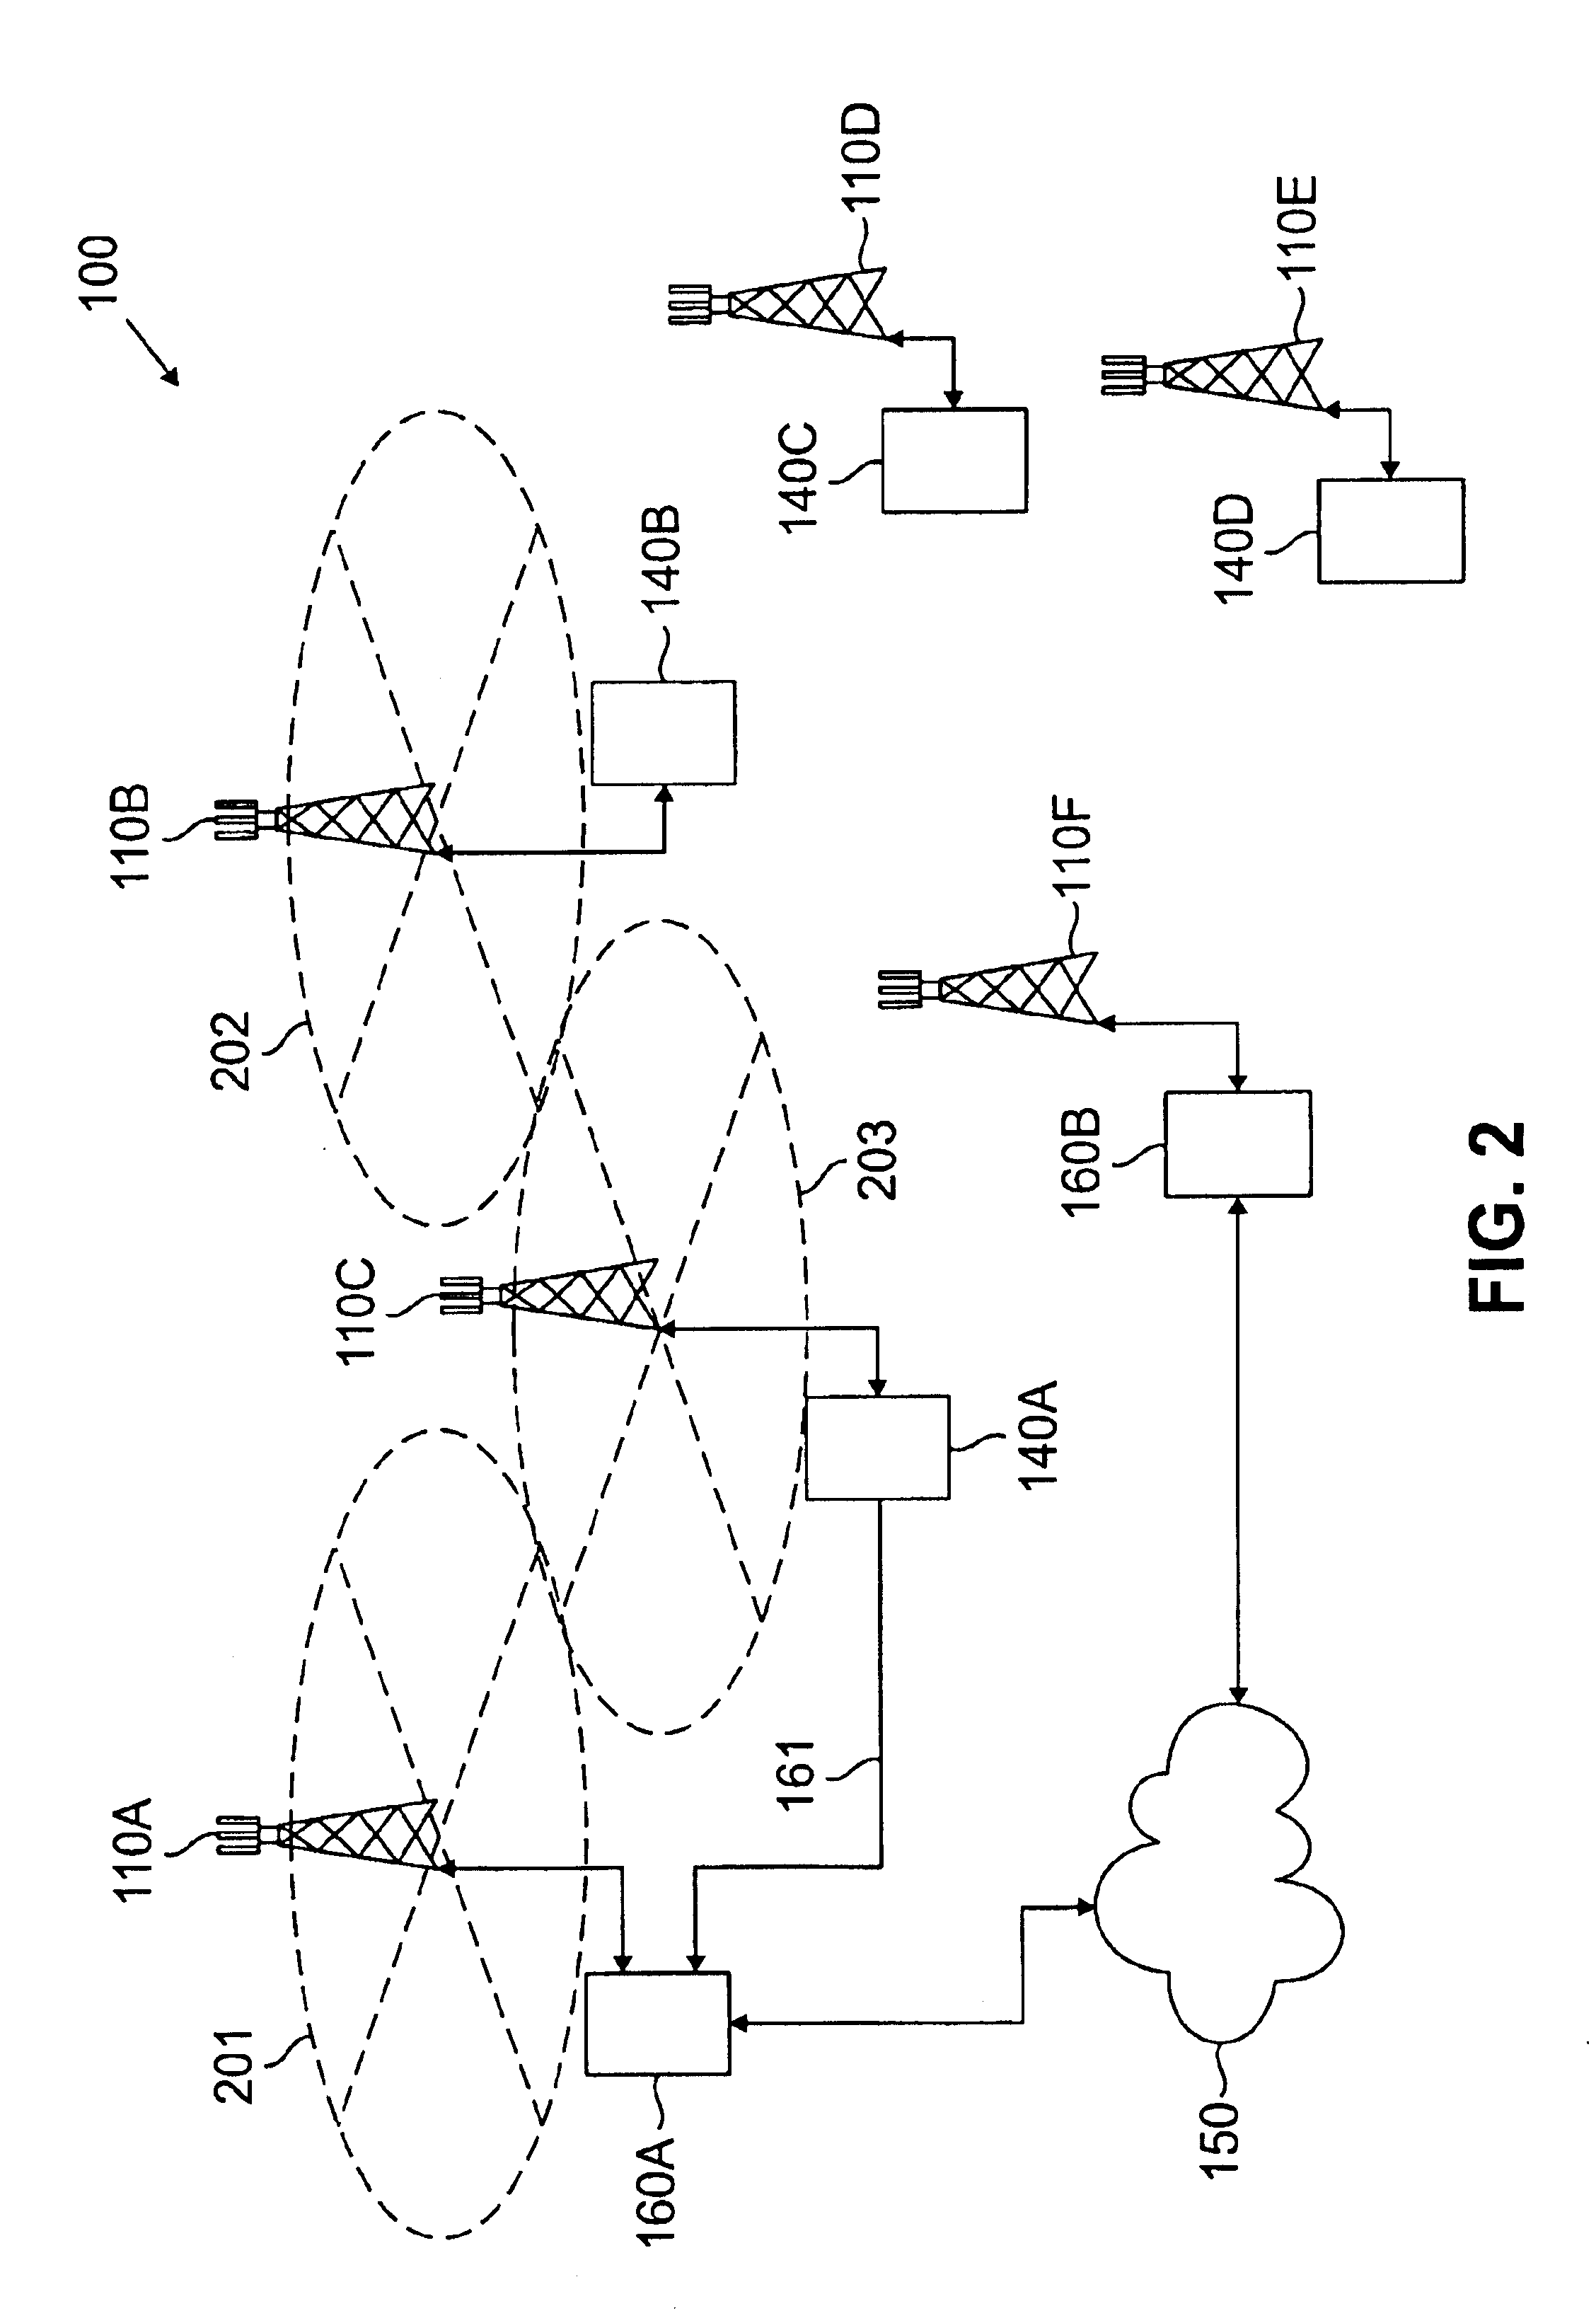 Wireless access system and associated method using multiple modulation formats in TDD frames according to subscriber service type